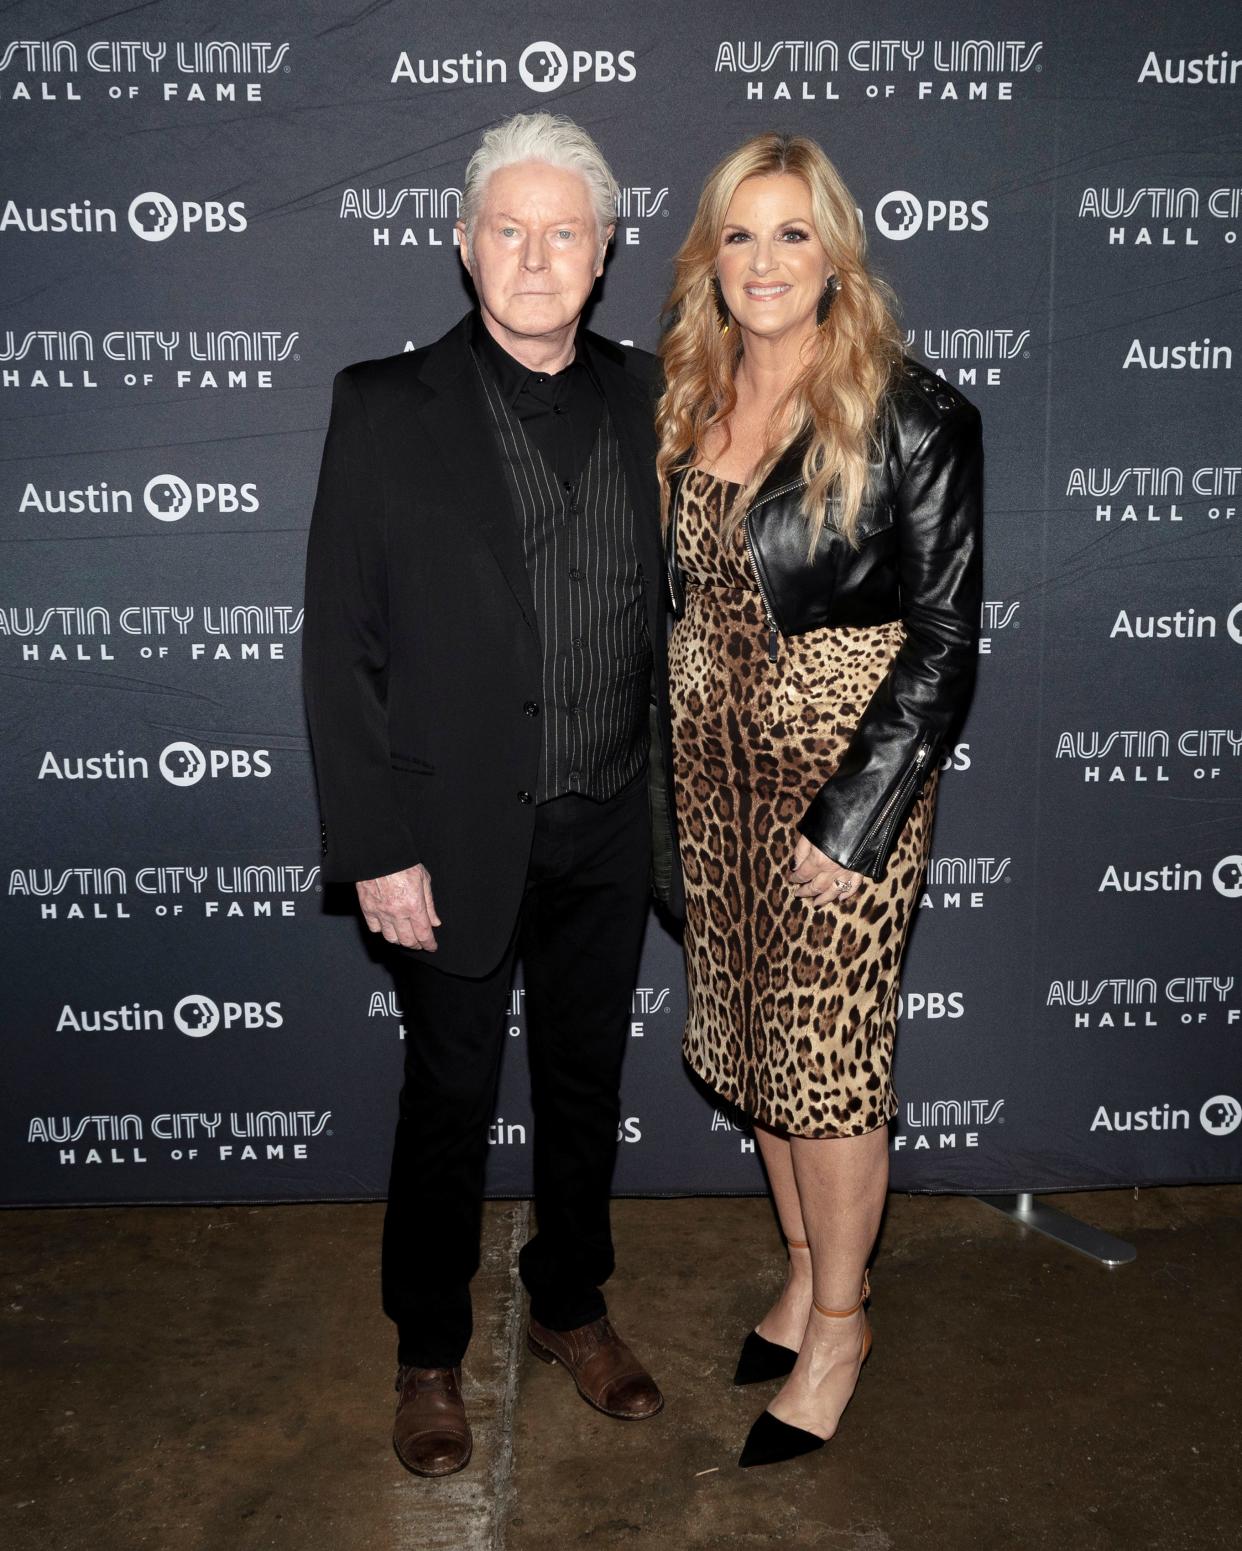 Don Henley with Trisha Yearwood at the "Austin City Limits" Hall of Fame show on Thursday at ACL Live. Henley delivered the induction speech for his longtime friend and duet partner Yearwood.